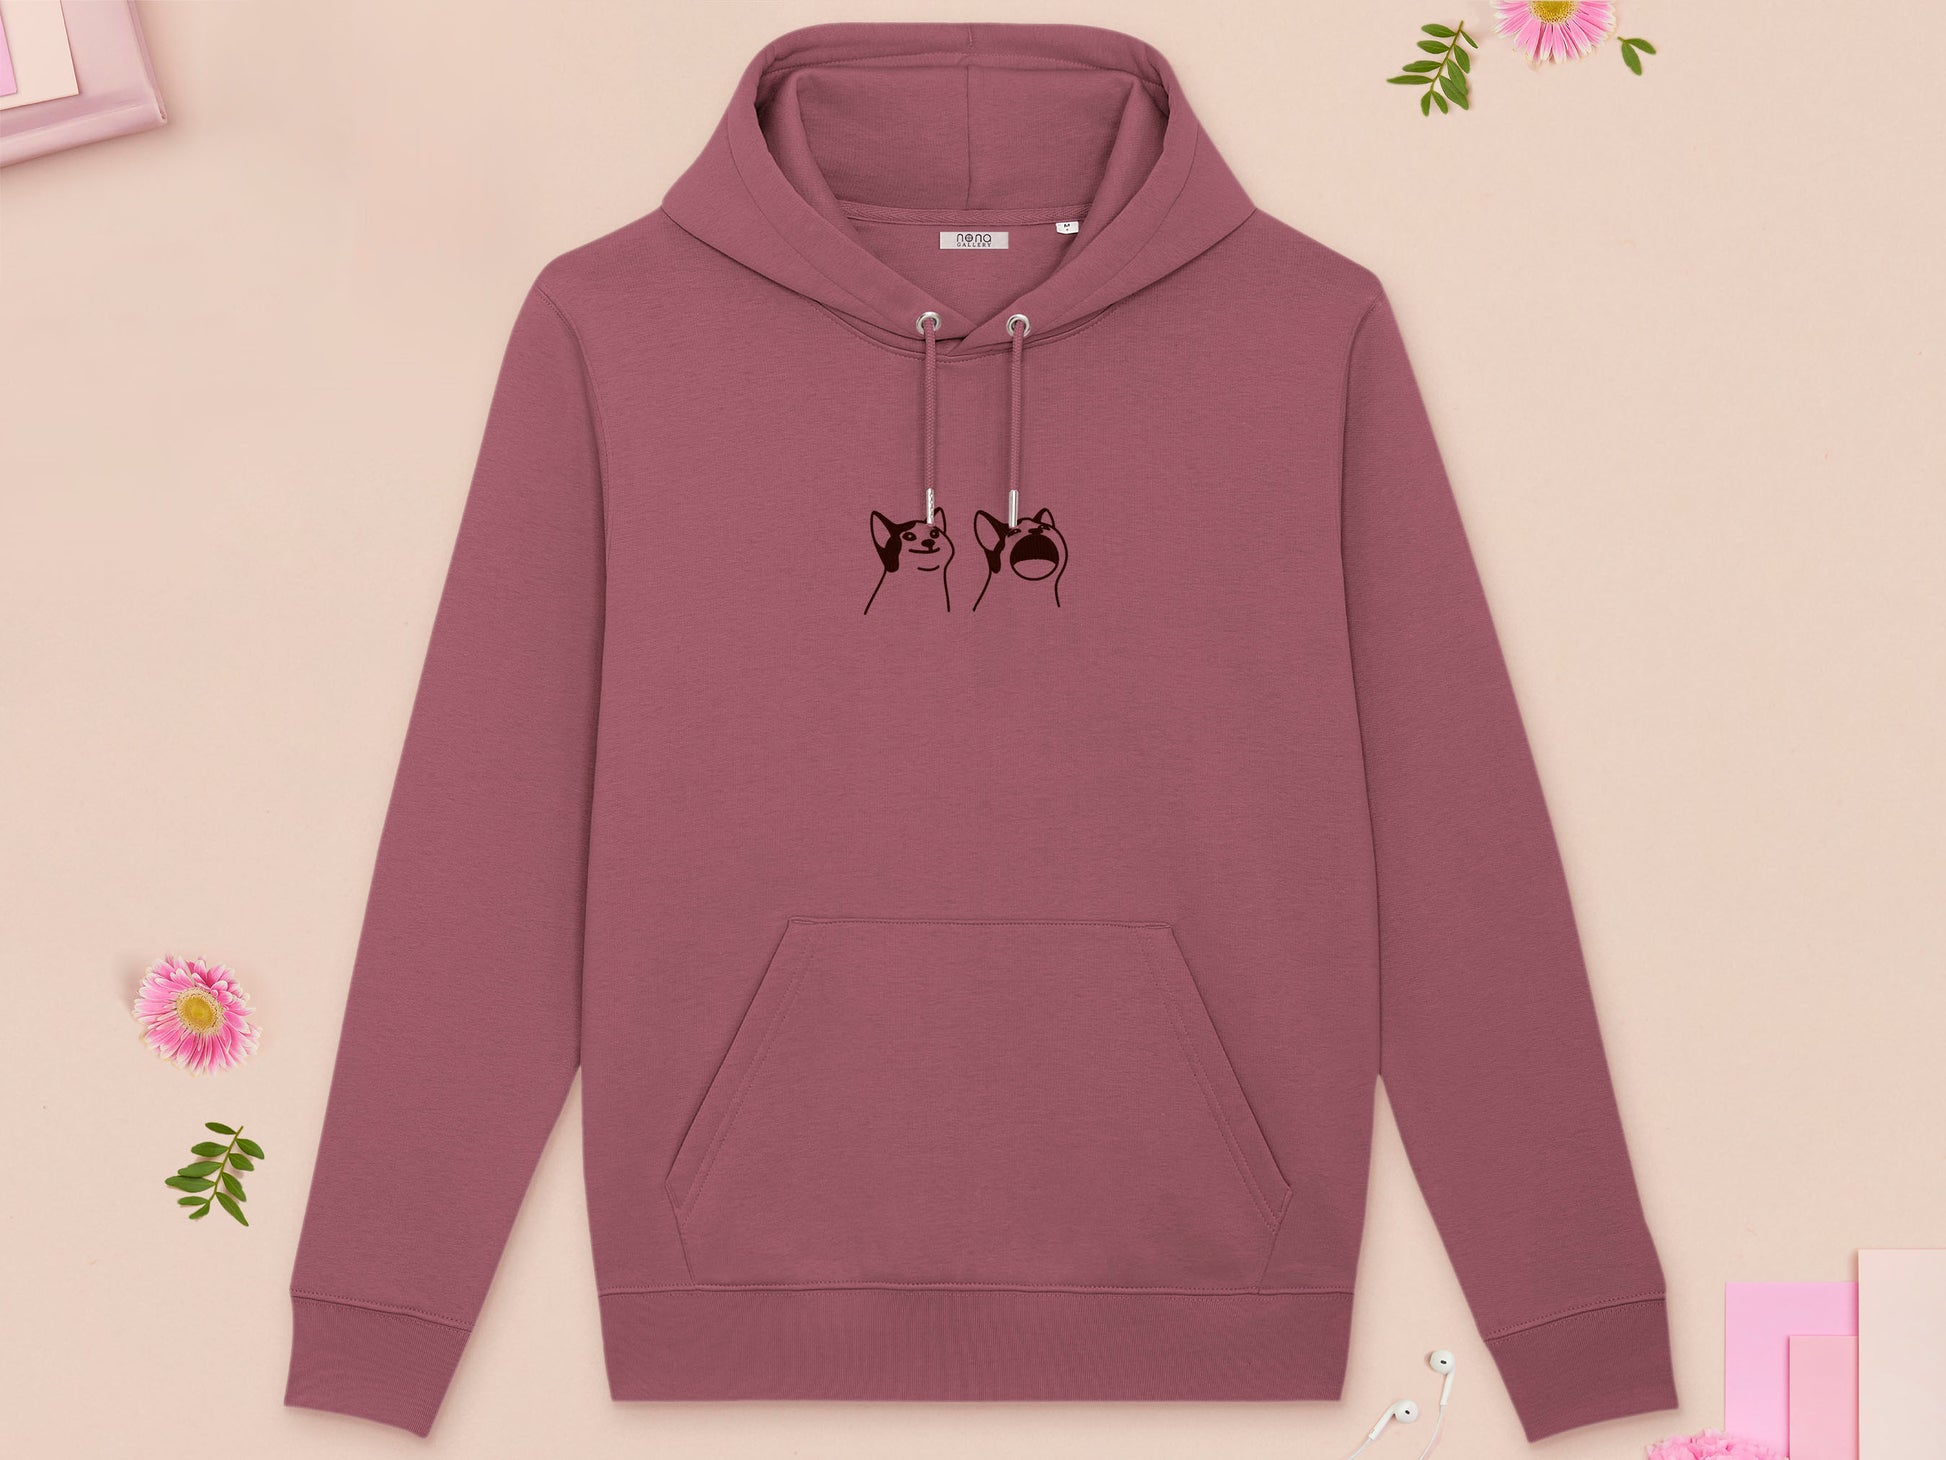 A red long sleeved fleece hoodie, with an embroidered brown thread design of a cute popcat the cat meme reaction twitch emote